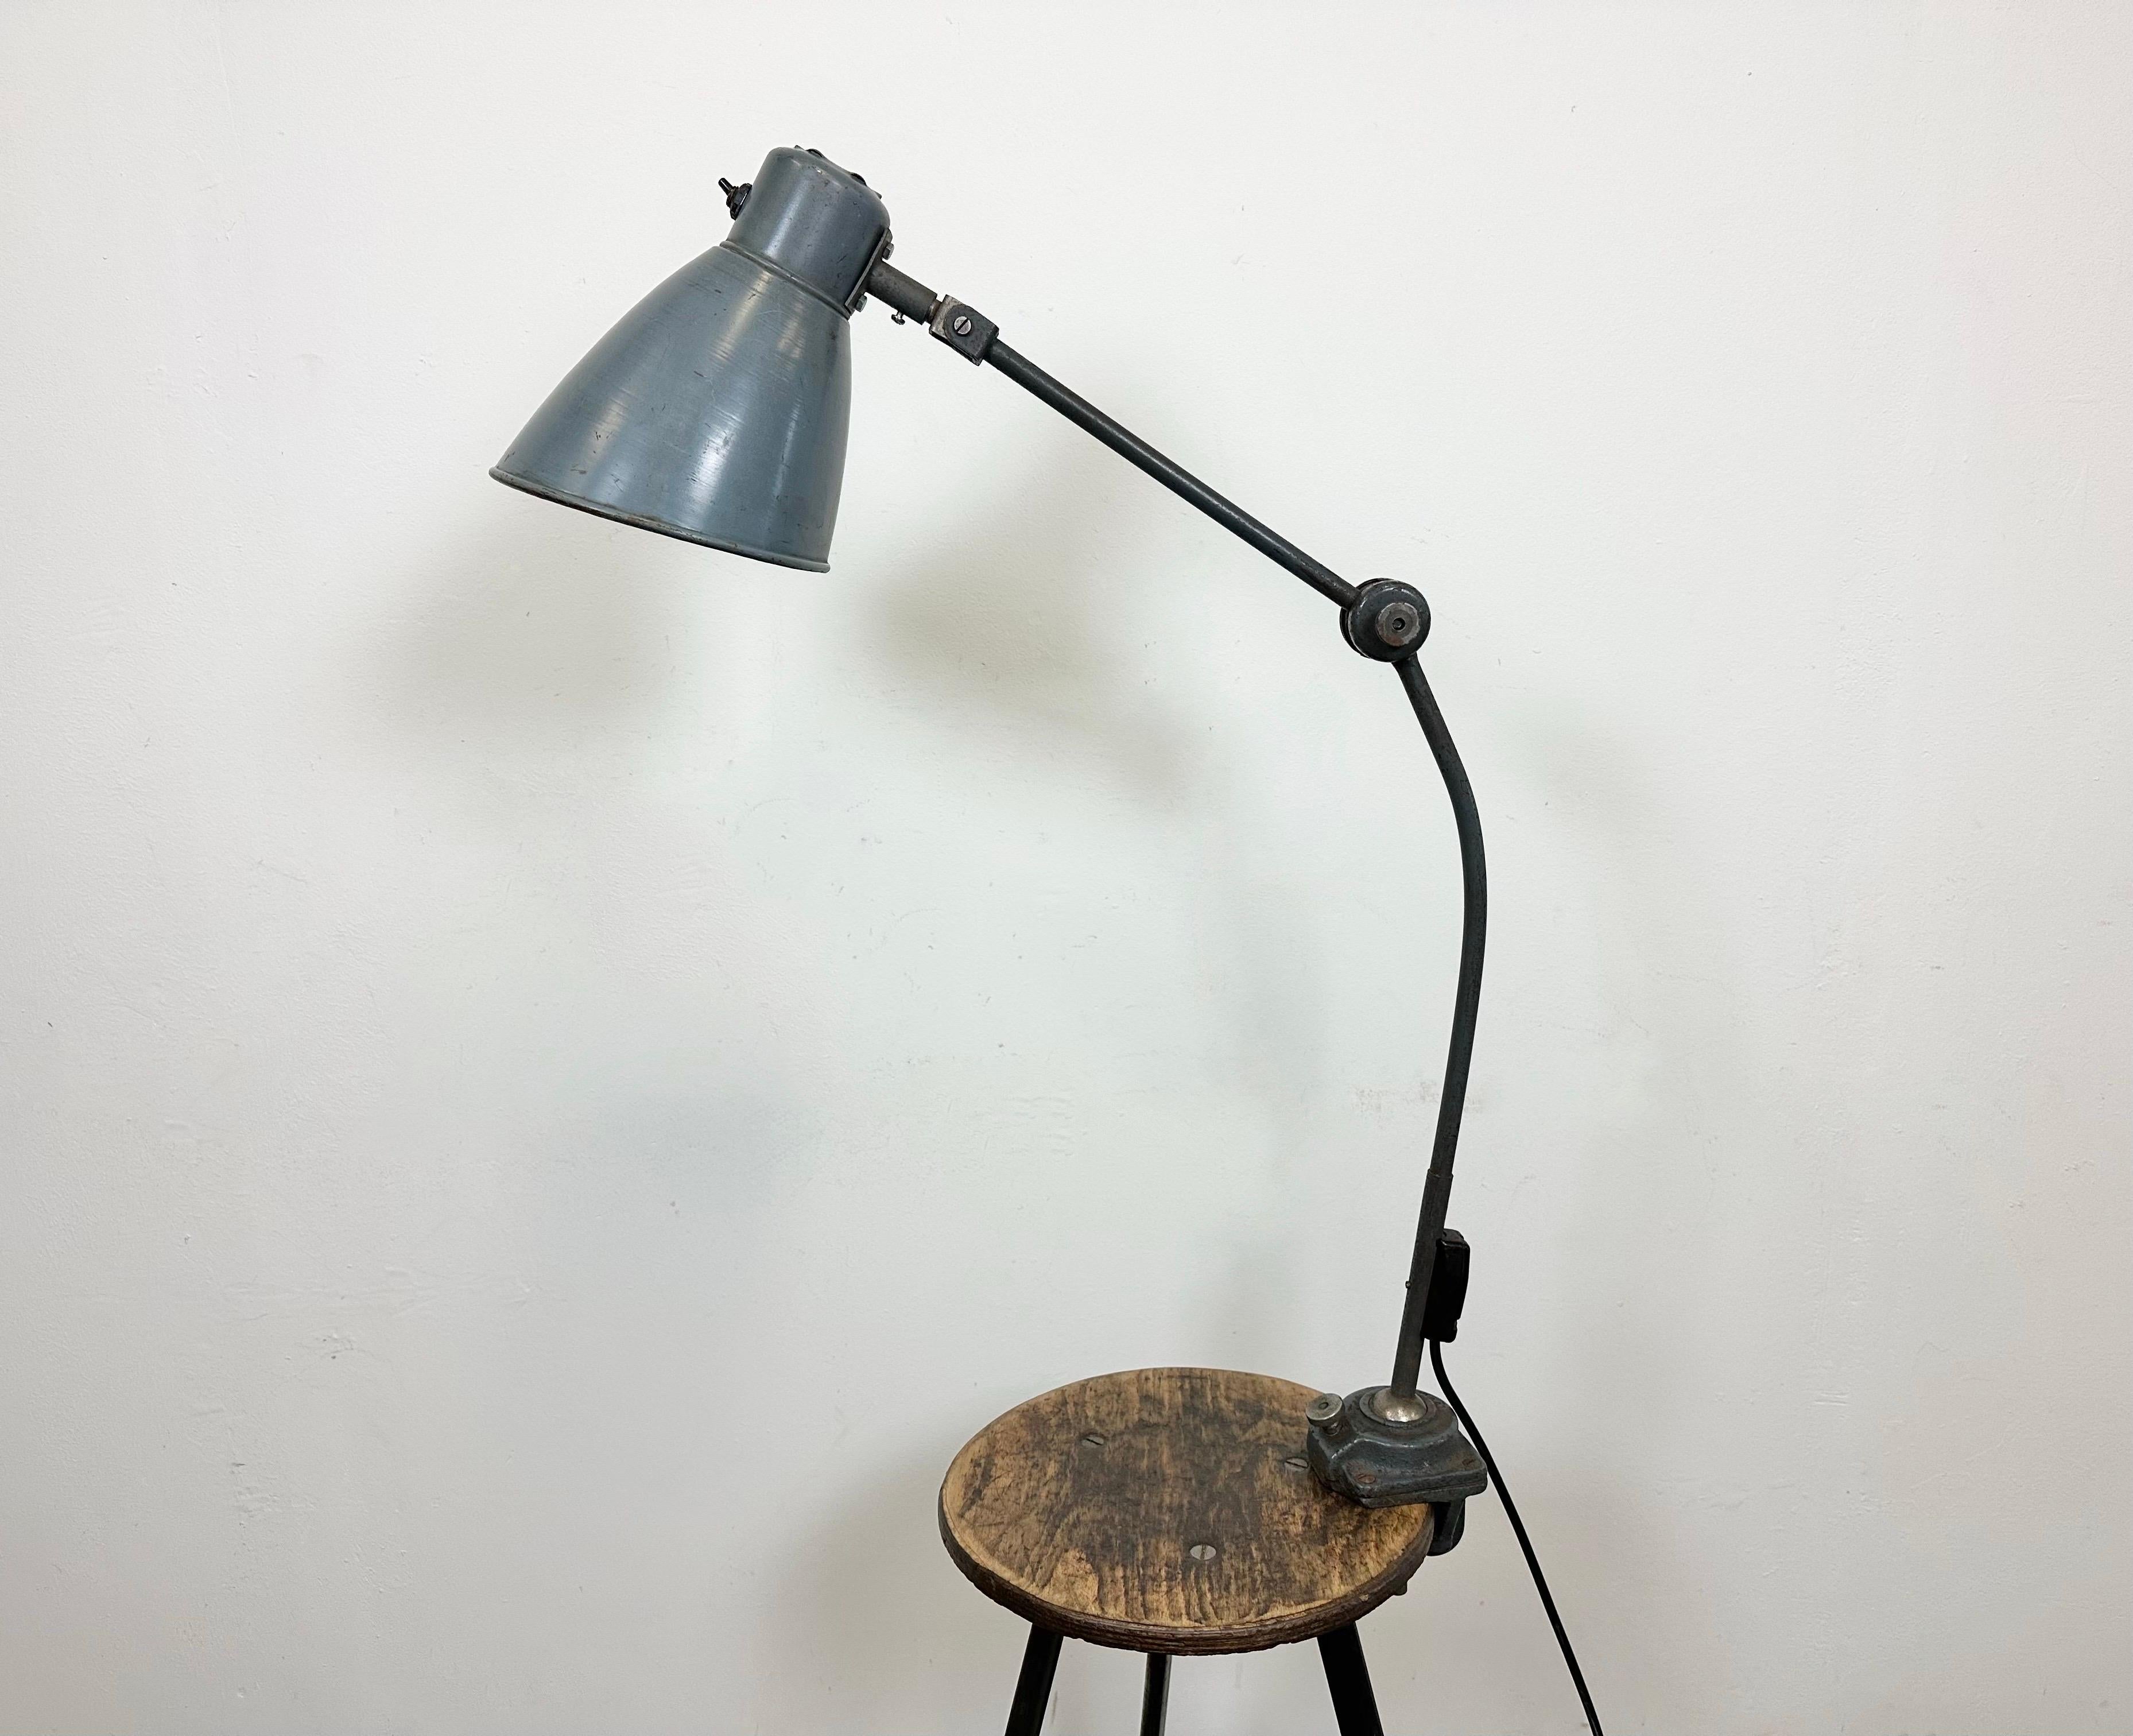 Large industrial table lamp with three adjustable joints made in former Czechoslovalia during the 1960s.It features a grey iron base ,arm and lampshade. The porcelain socket requires E 27/E 26 light bulbs. New wire. The diameter of the shade is 17